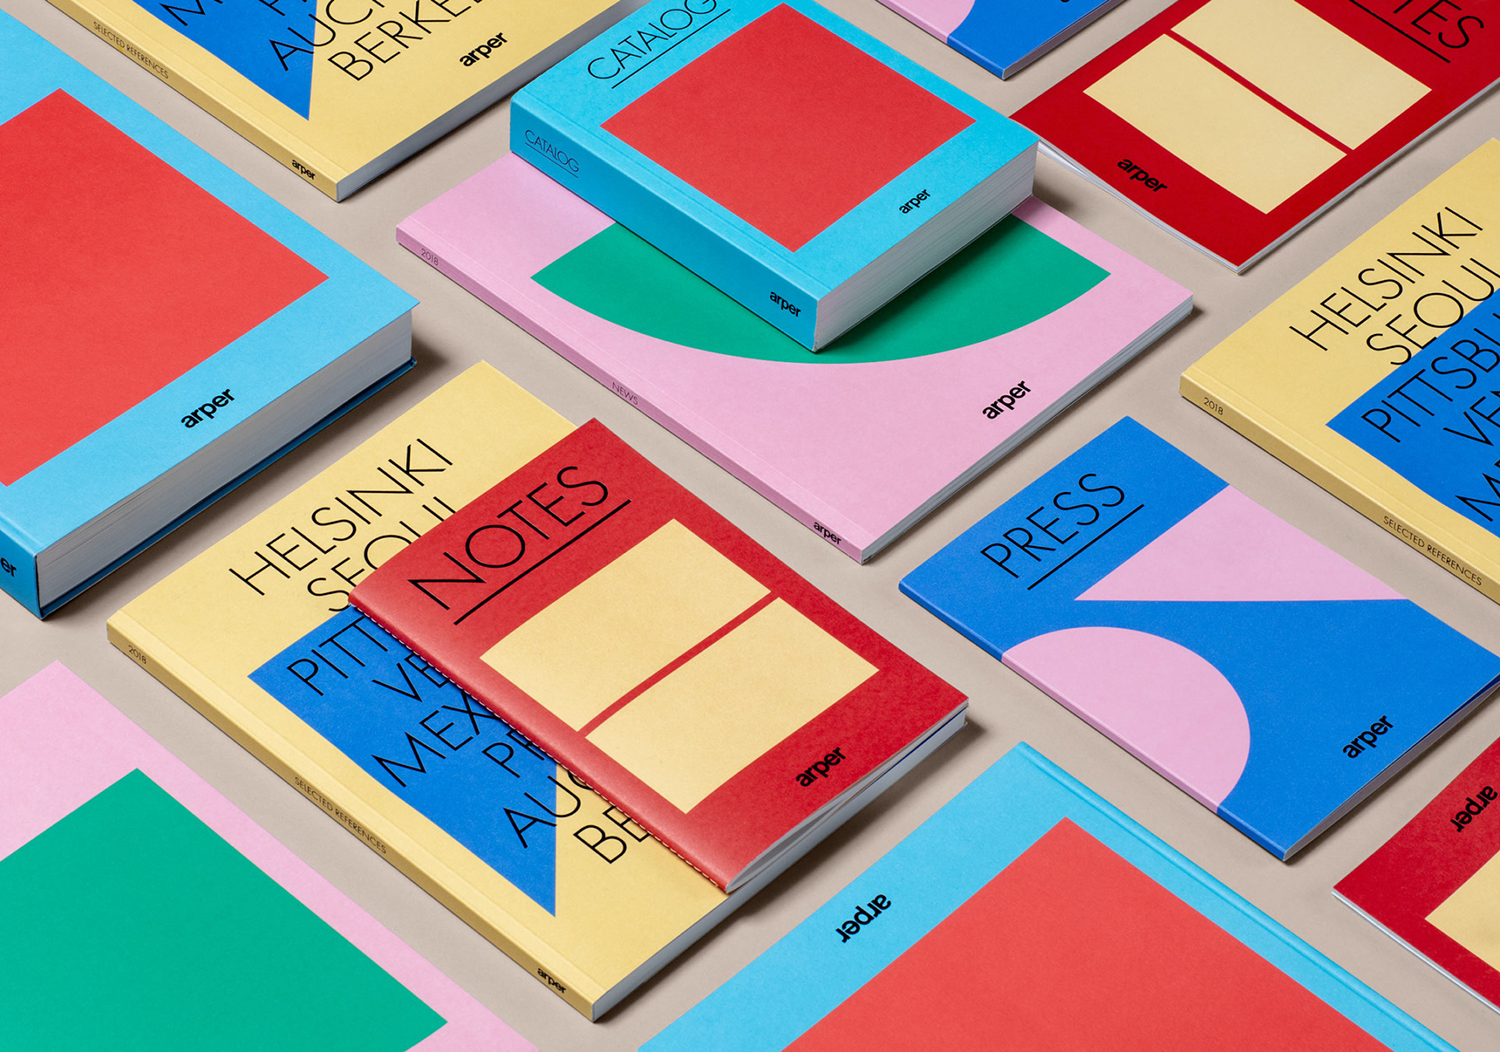 Graphic identity, catalogues, notebooks and press packs by Clase bcn for Italian furniture company Arper